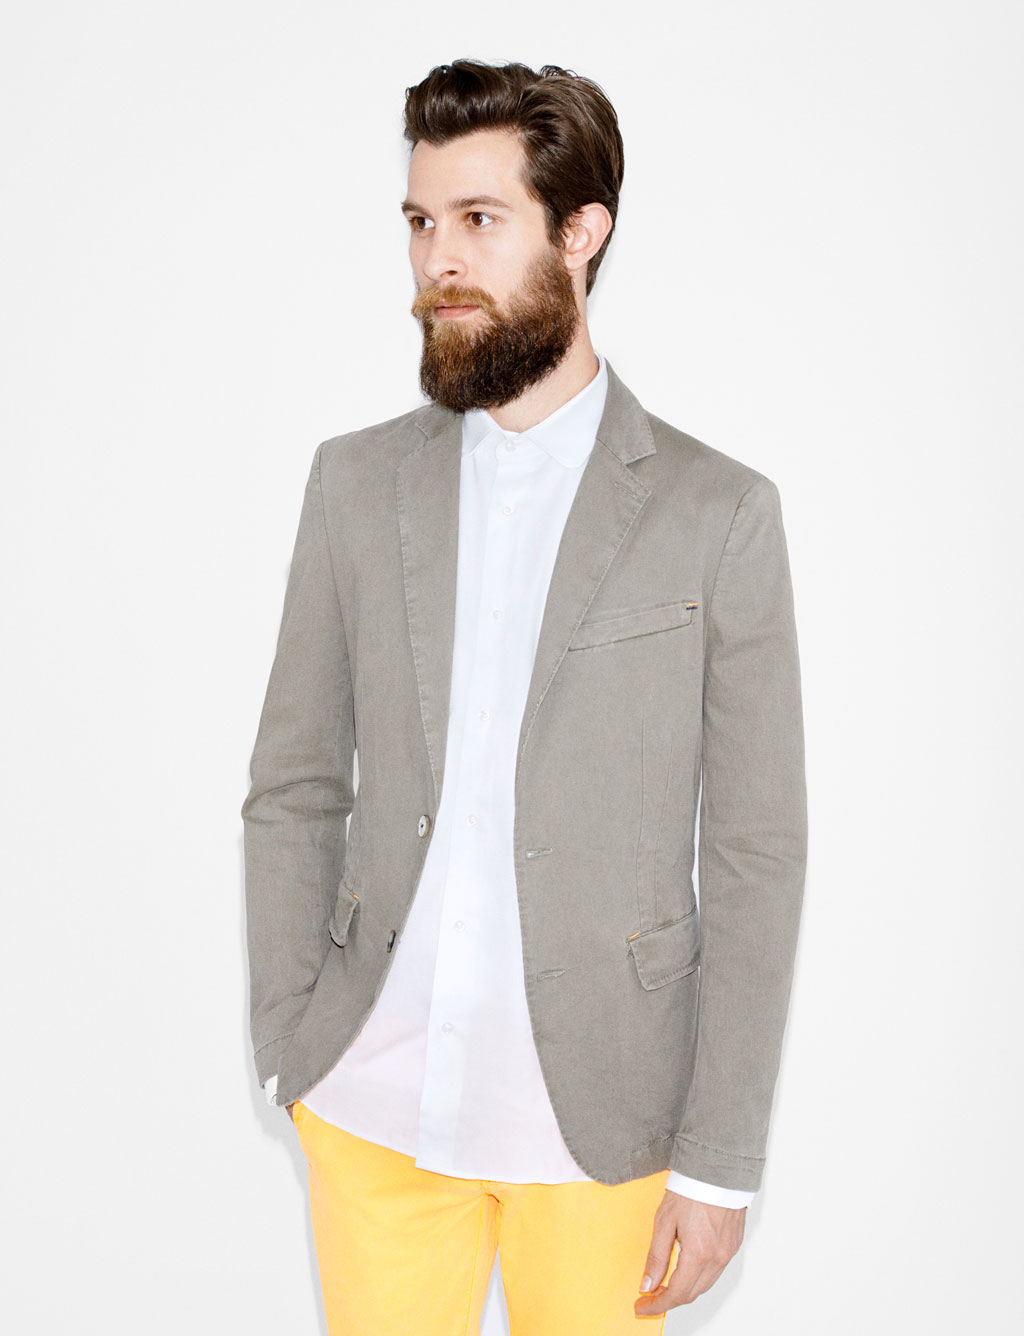 Justin Passmore & Vincent LaCrocq Model Spring Styles for Zara – The ...